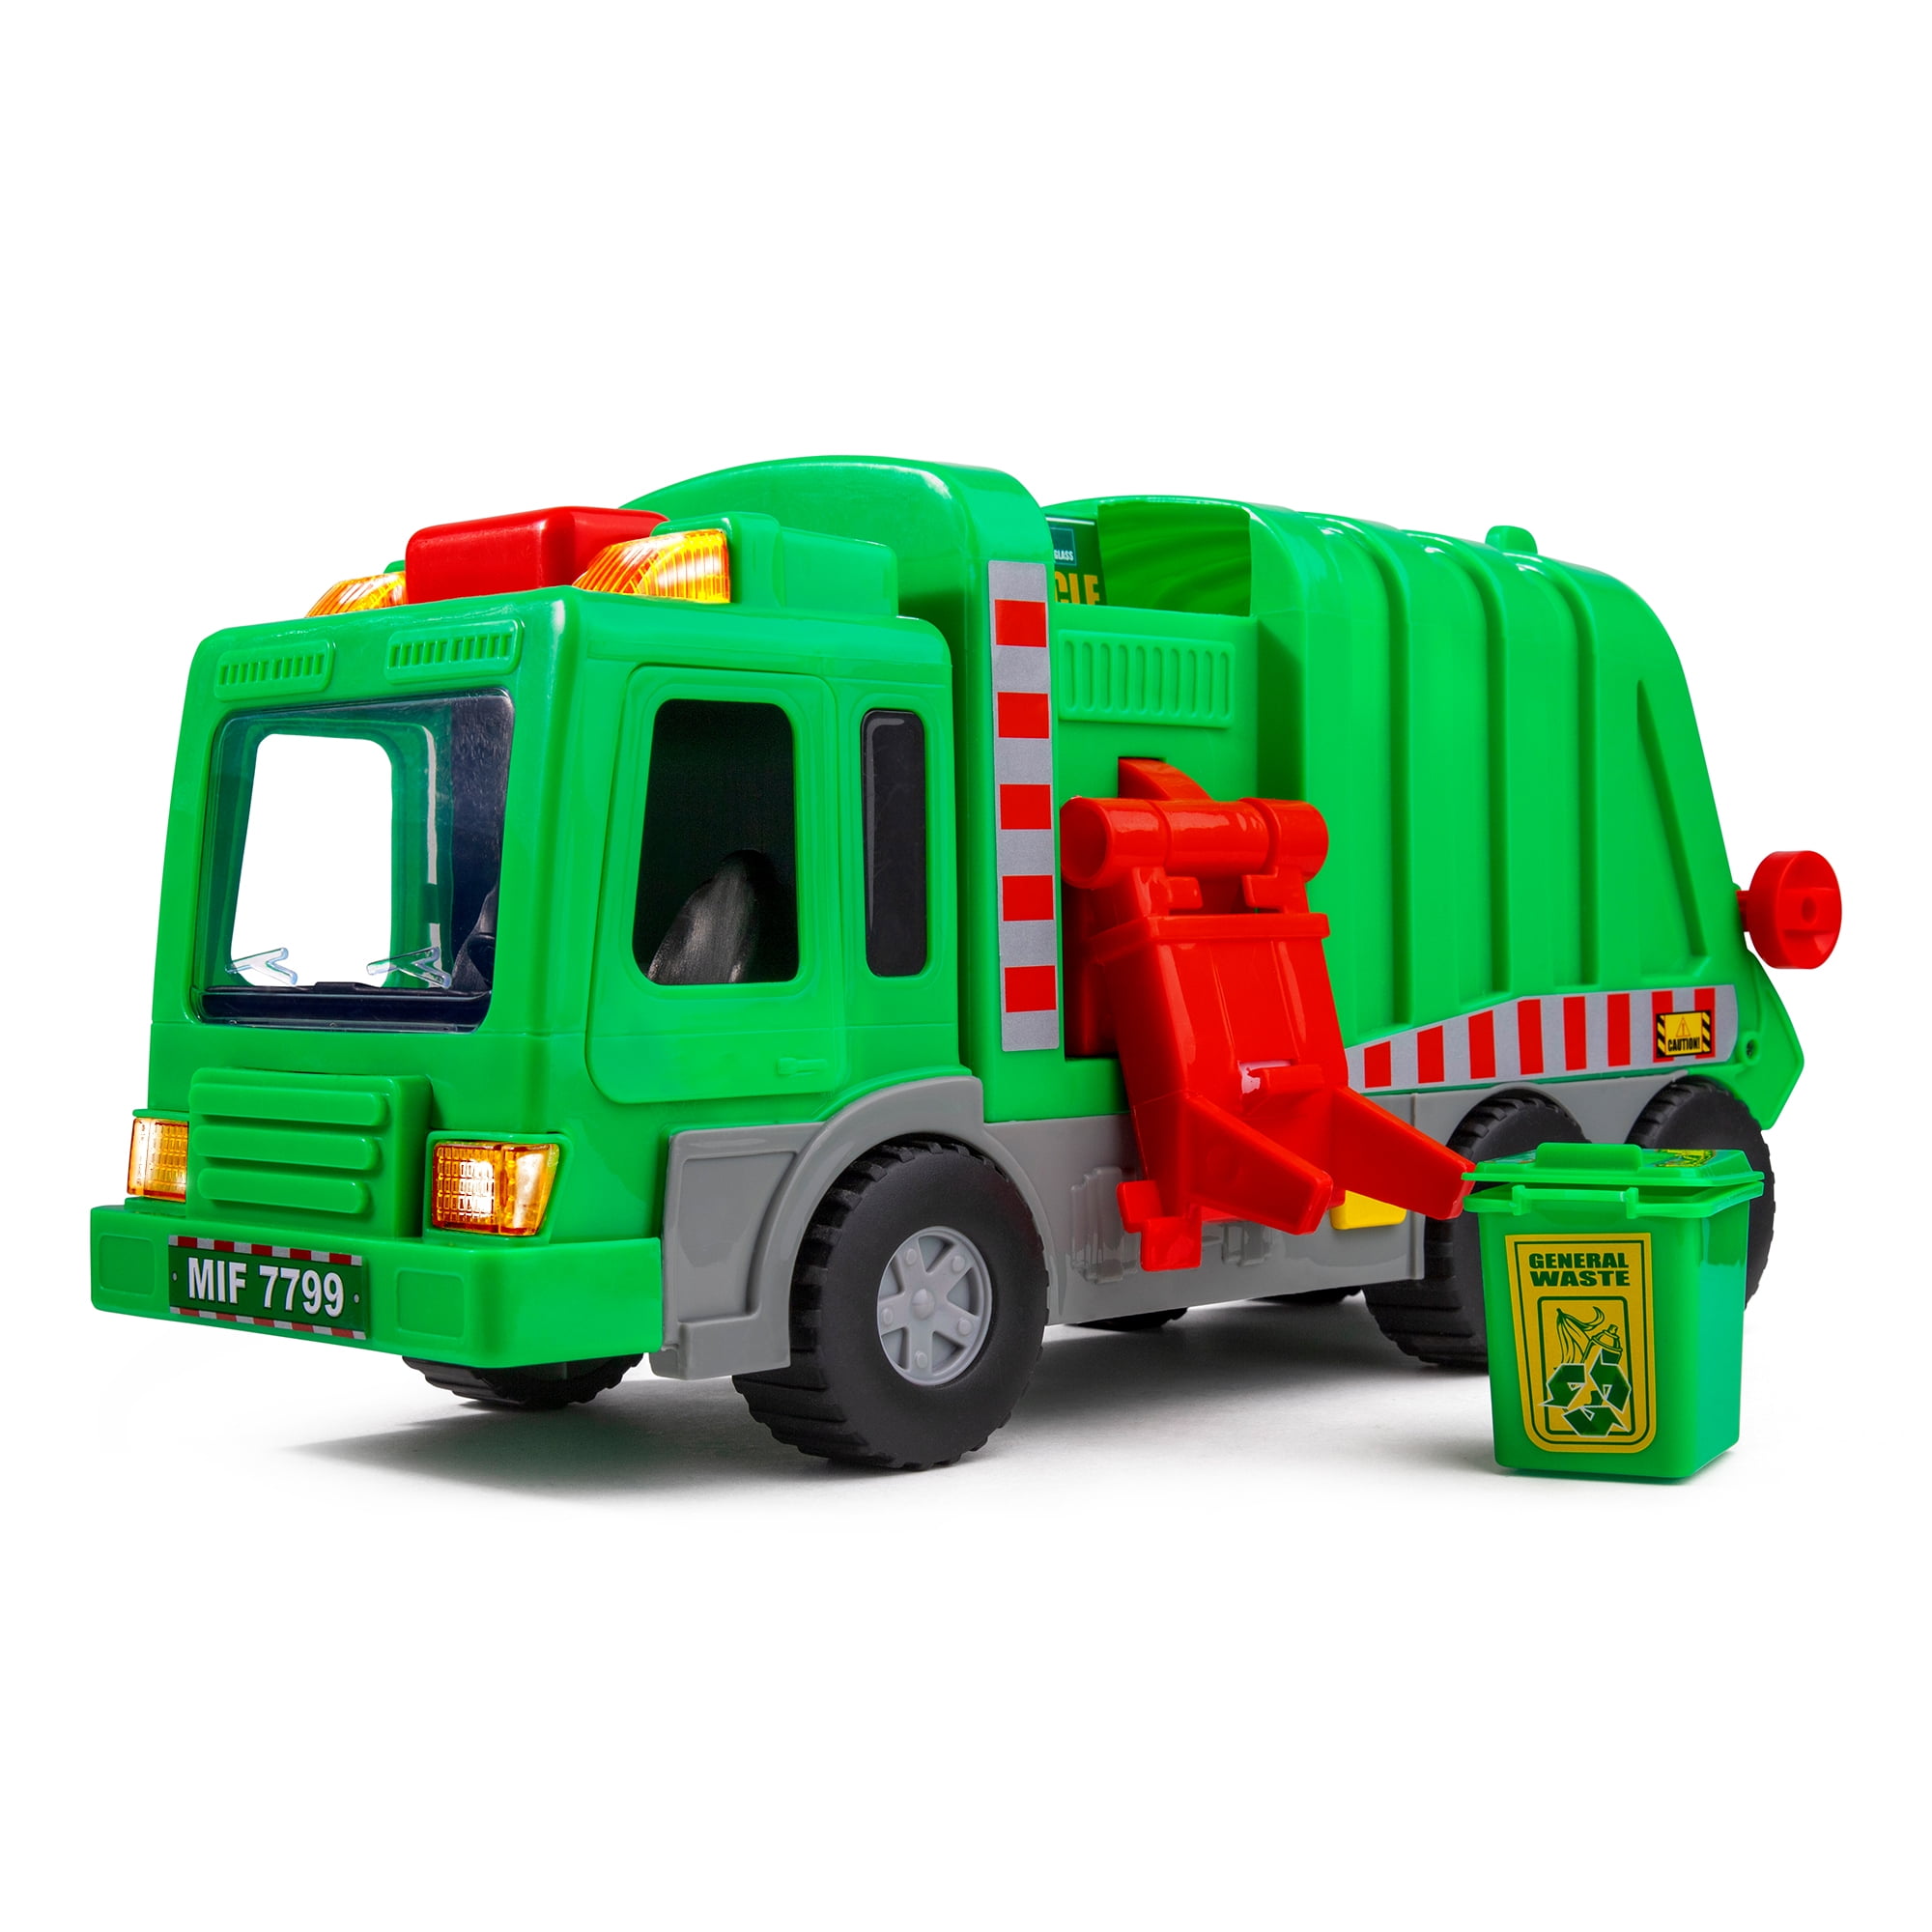 58385 for sale online Real Working Buddies Mr Dusty The Super Duper Toy Eating Garbage Truck 